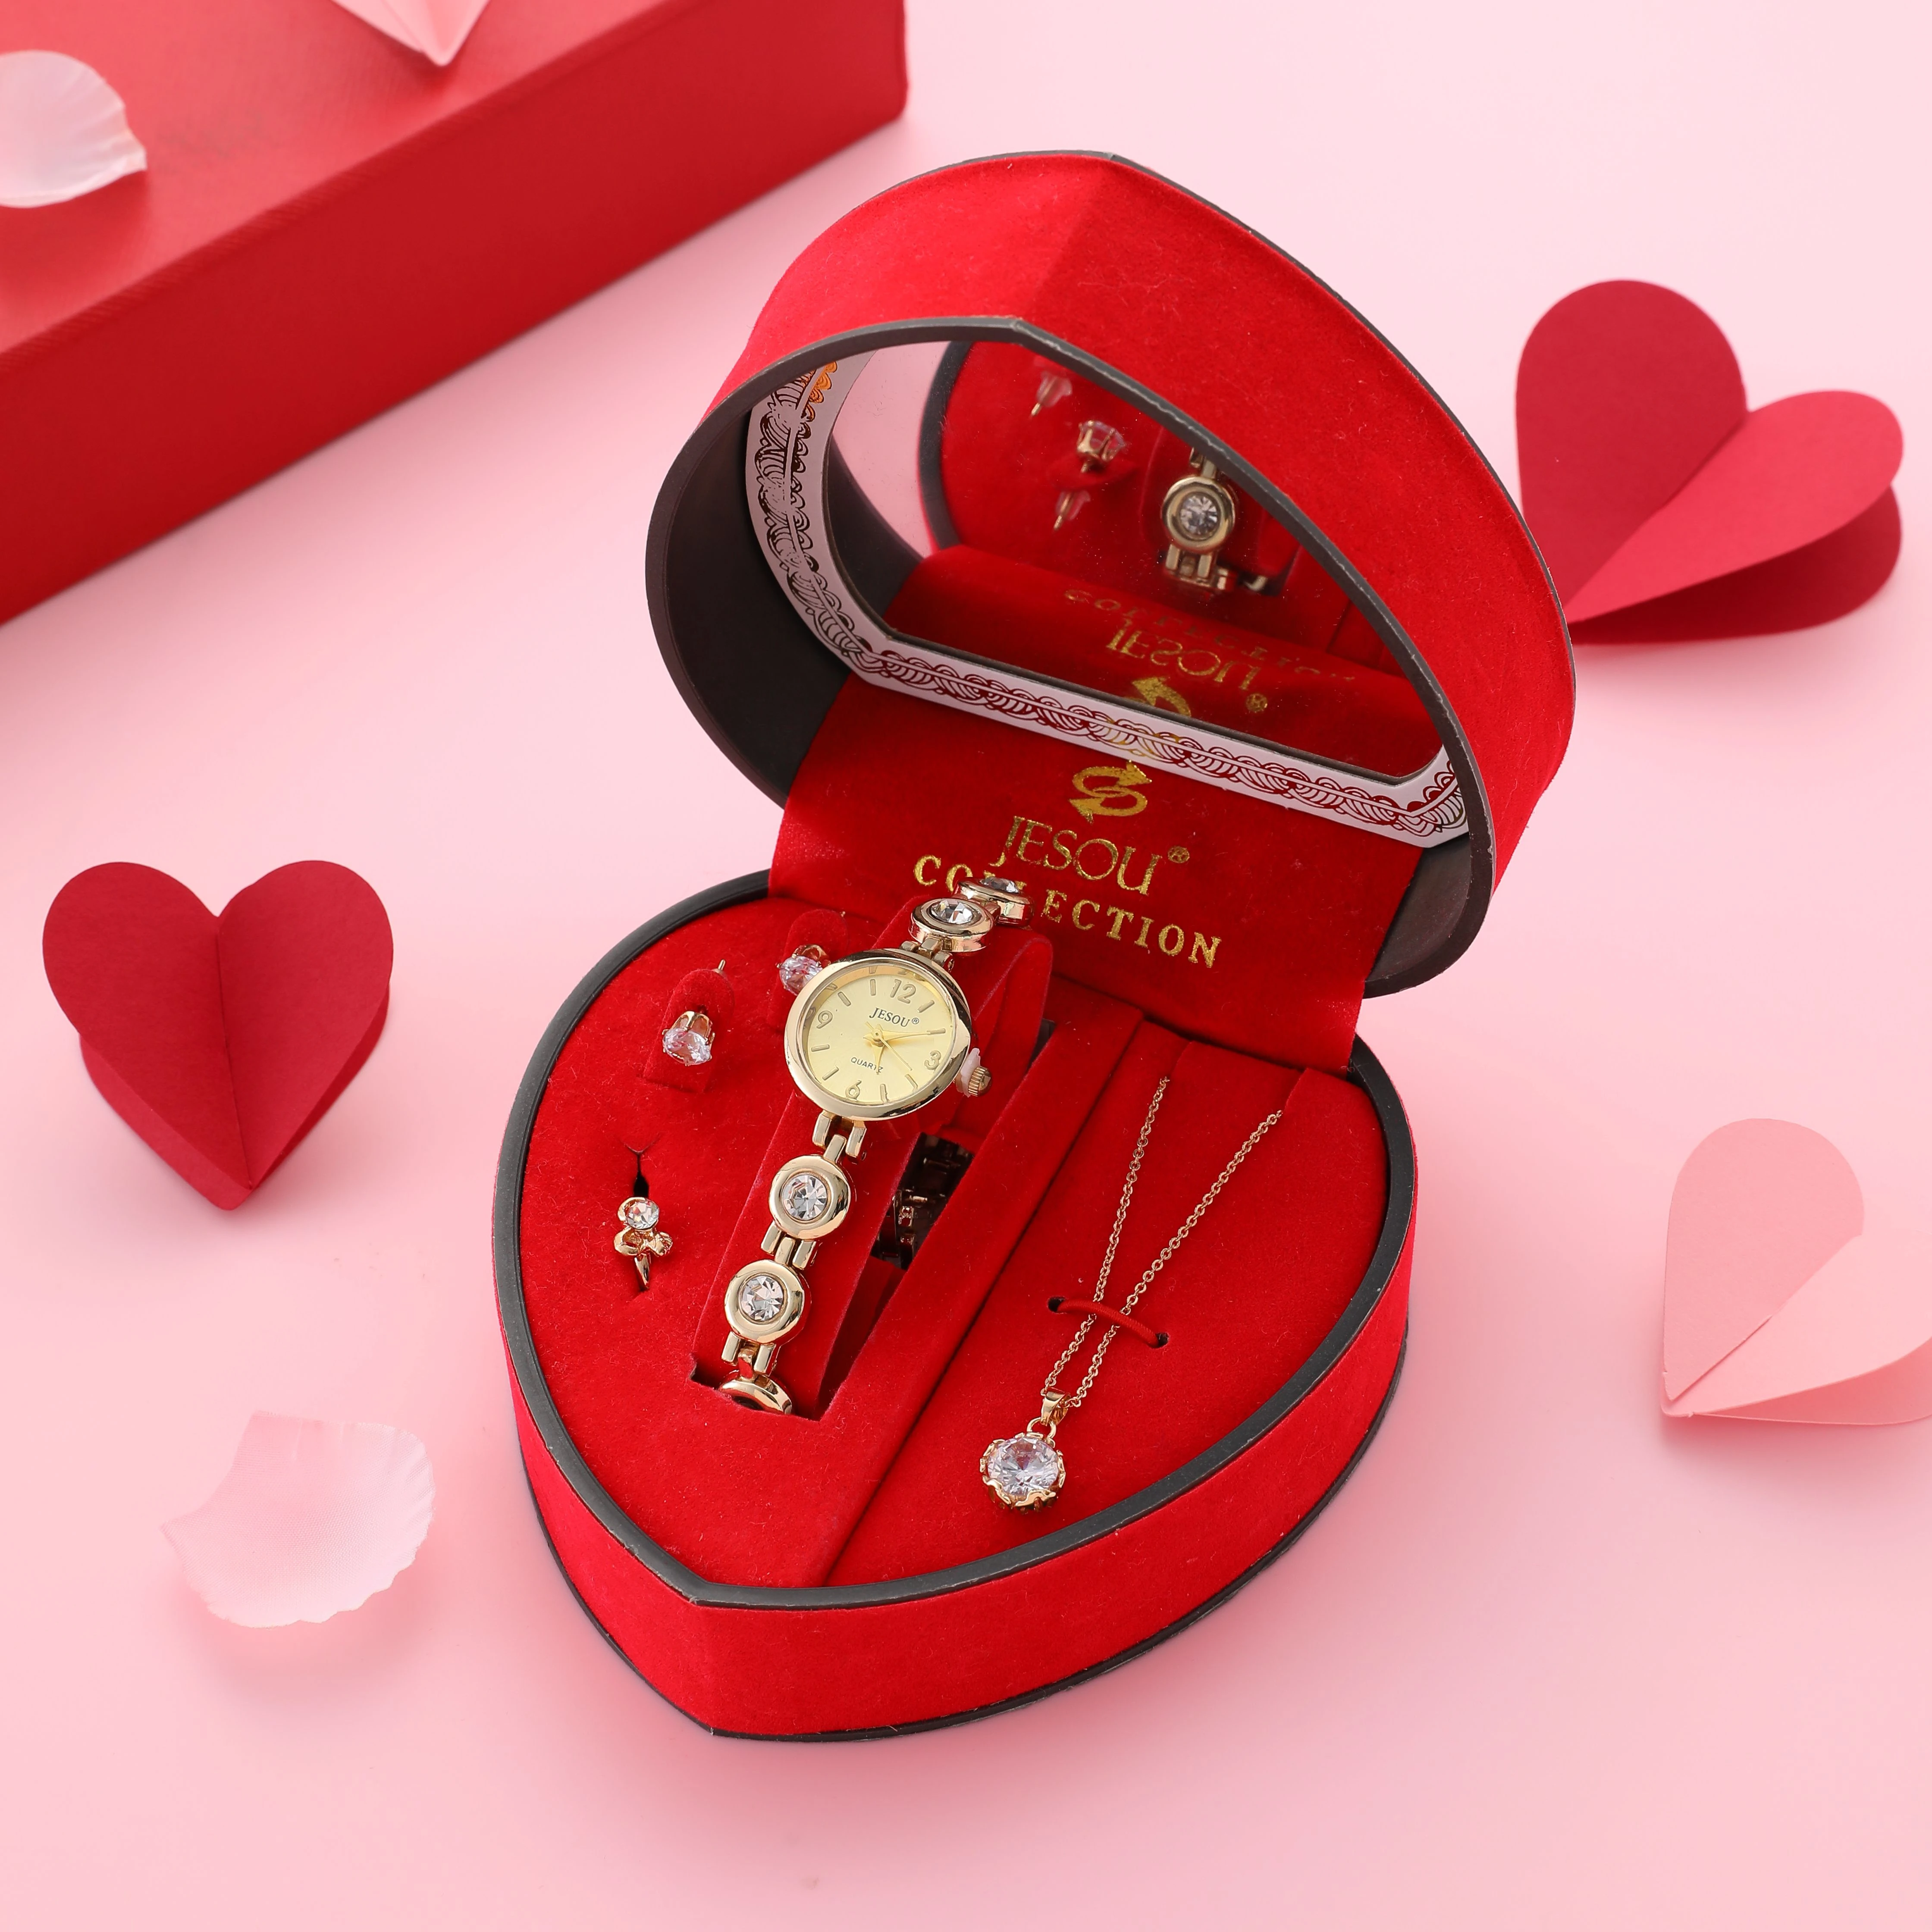 

Luxury Jewelry Gift Set 2022 new arrival ladies watch exquisite necklace ring earrings jewelry 4pcs red heart shape packaging, Multiple color options